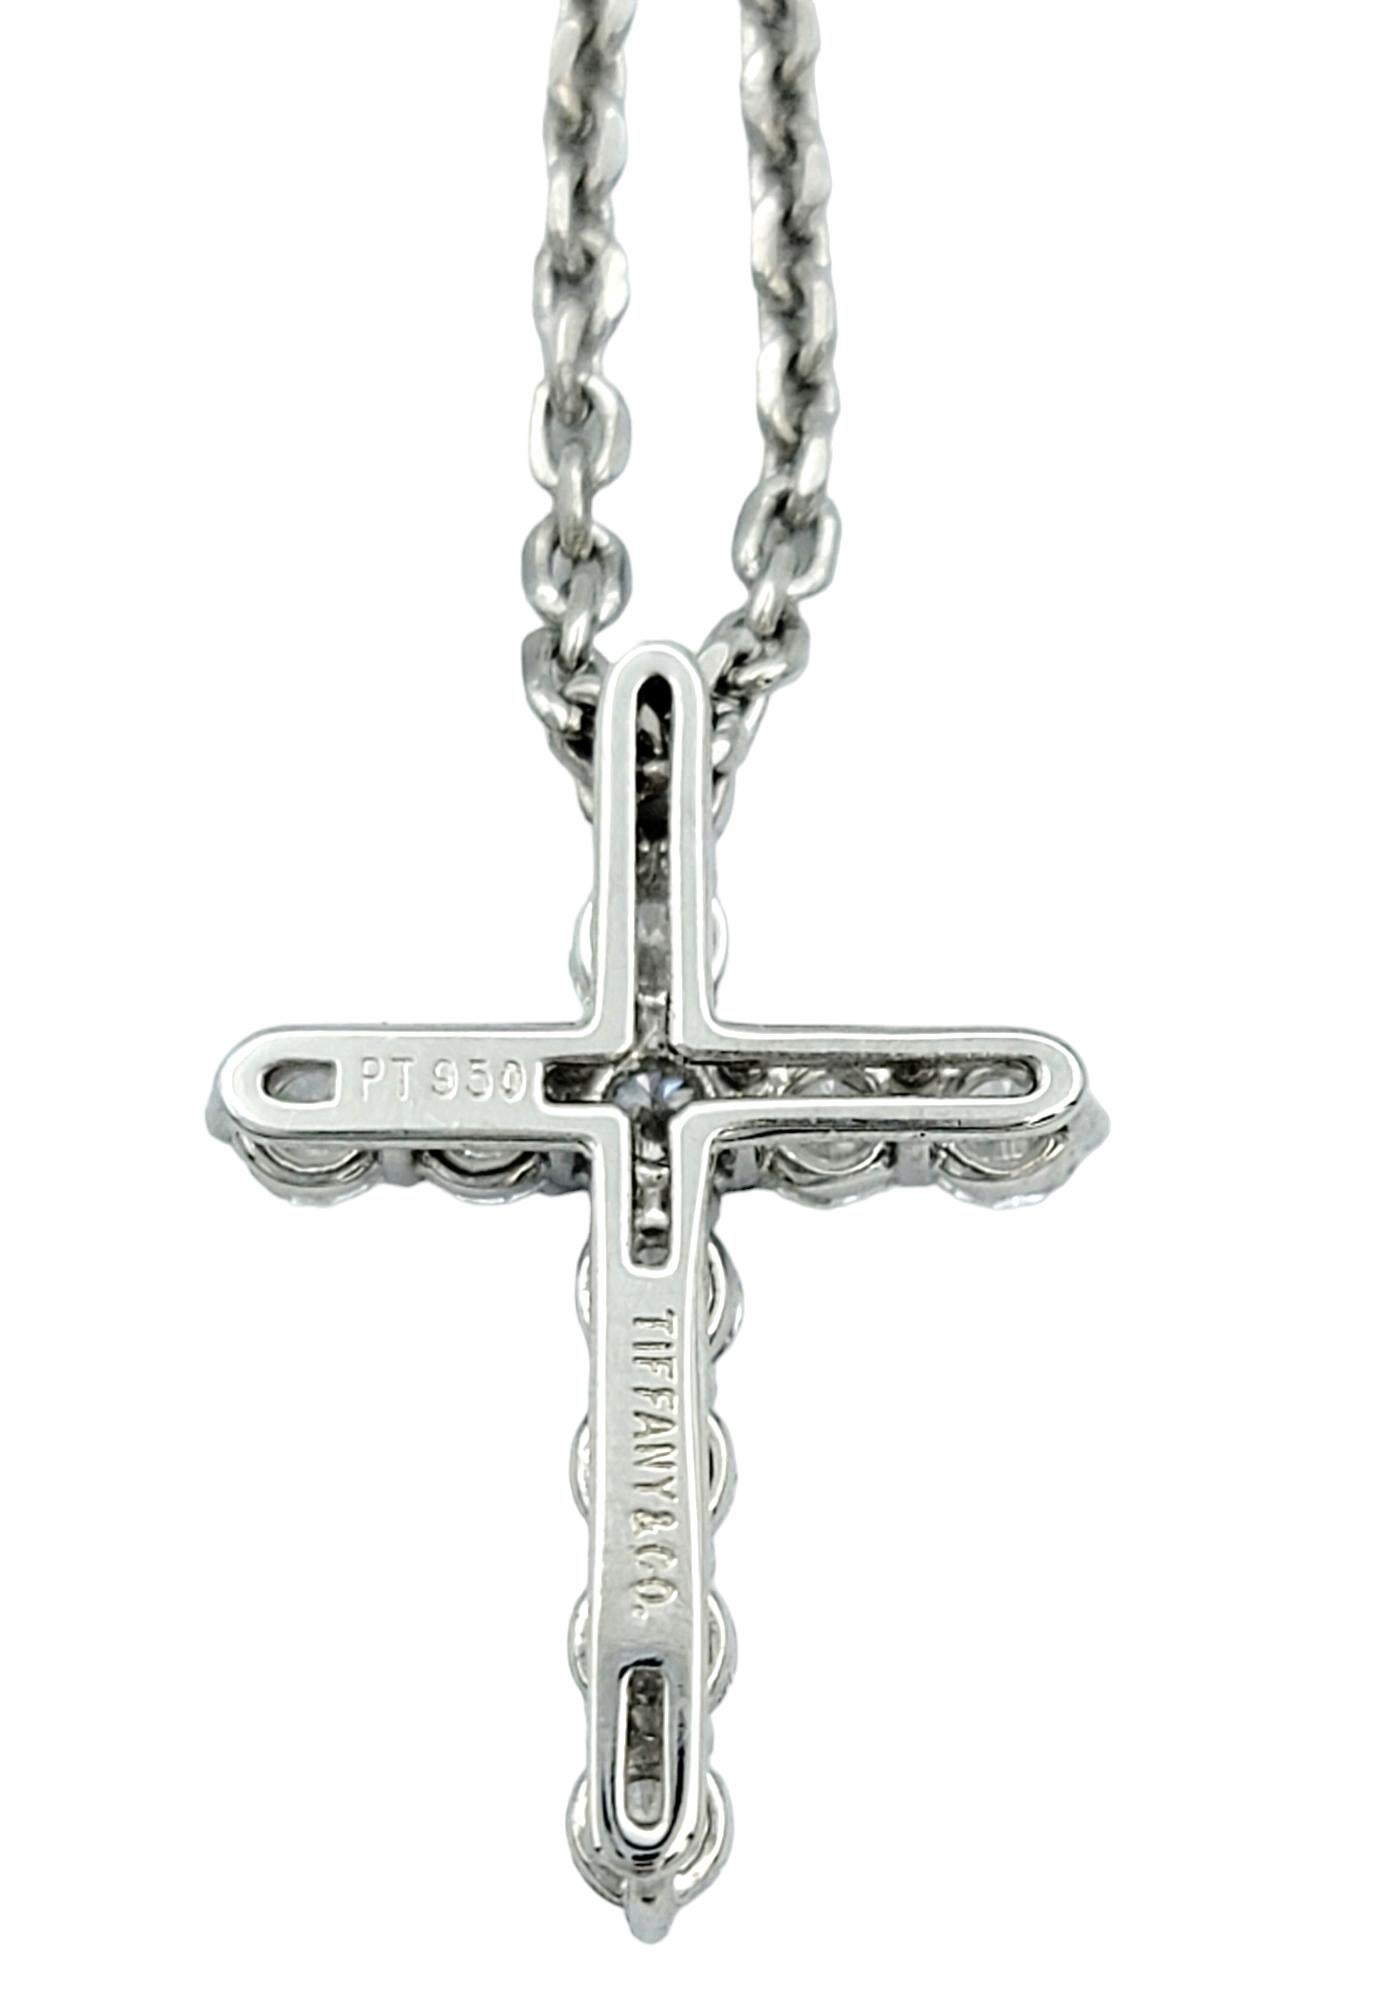 Tiffany & Co. Round Diamond Cross Pendant Necklace Set in Polished Platinum  In Excellent Condition For Sale In Scottsdale, AZ